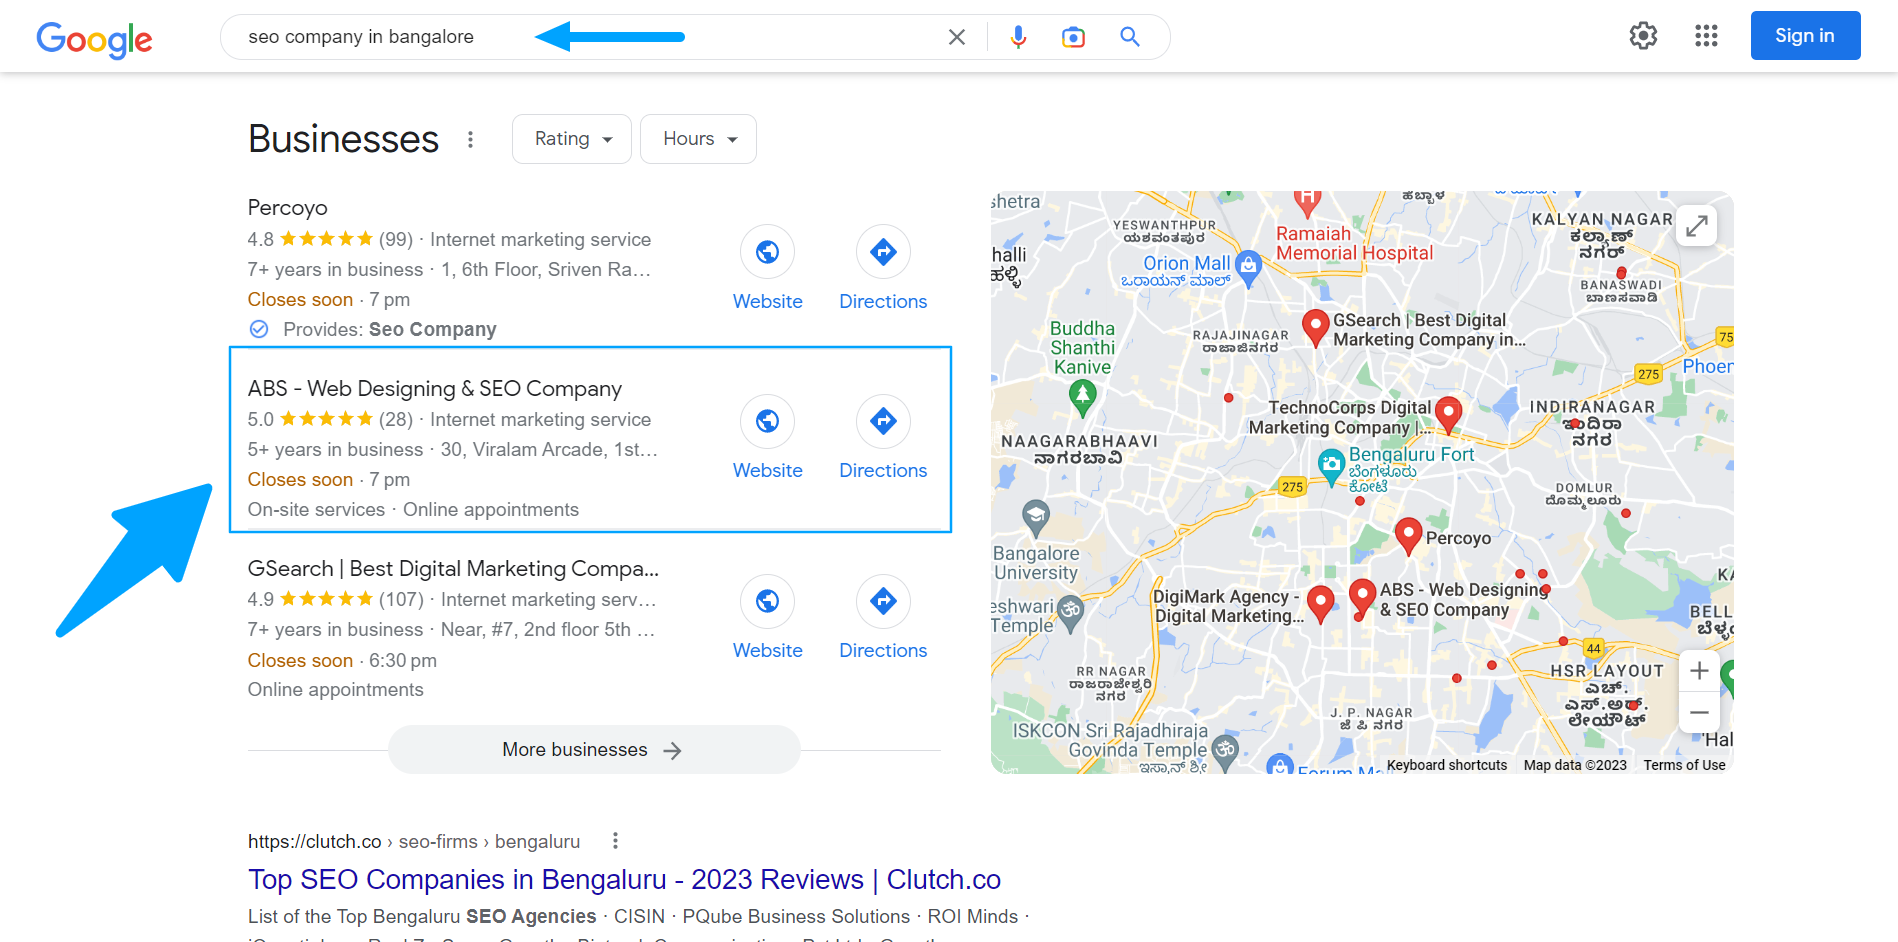 rank 1 google local pack top results seo company in bangalore Google Search